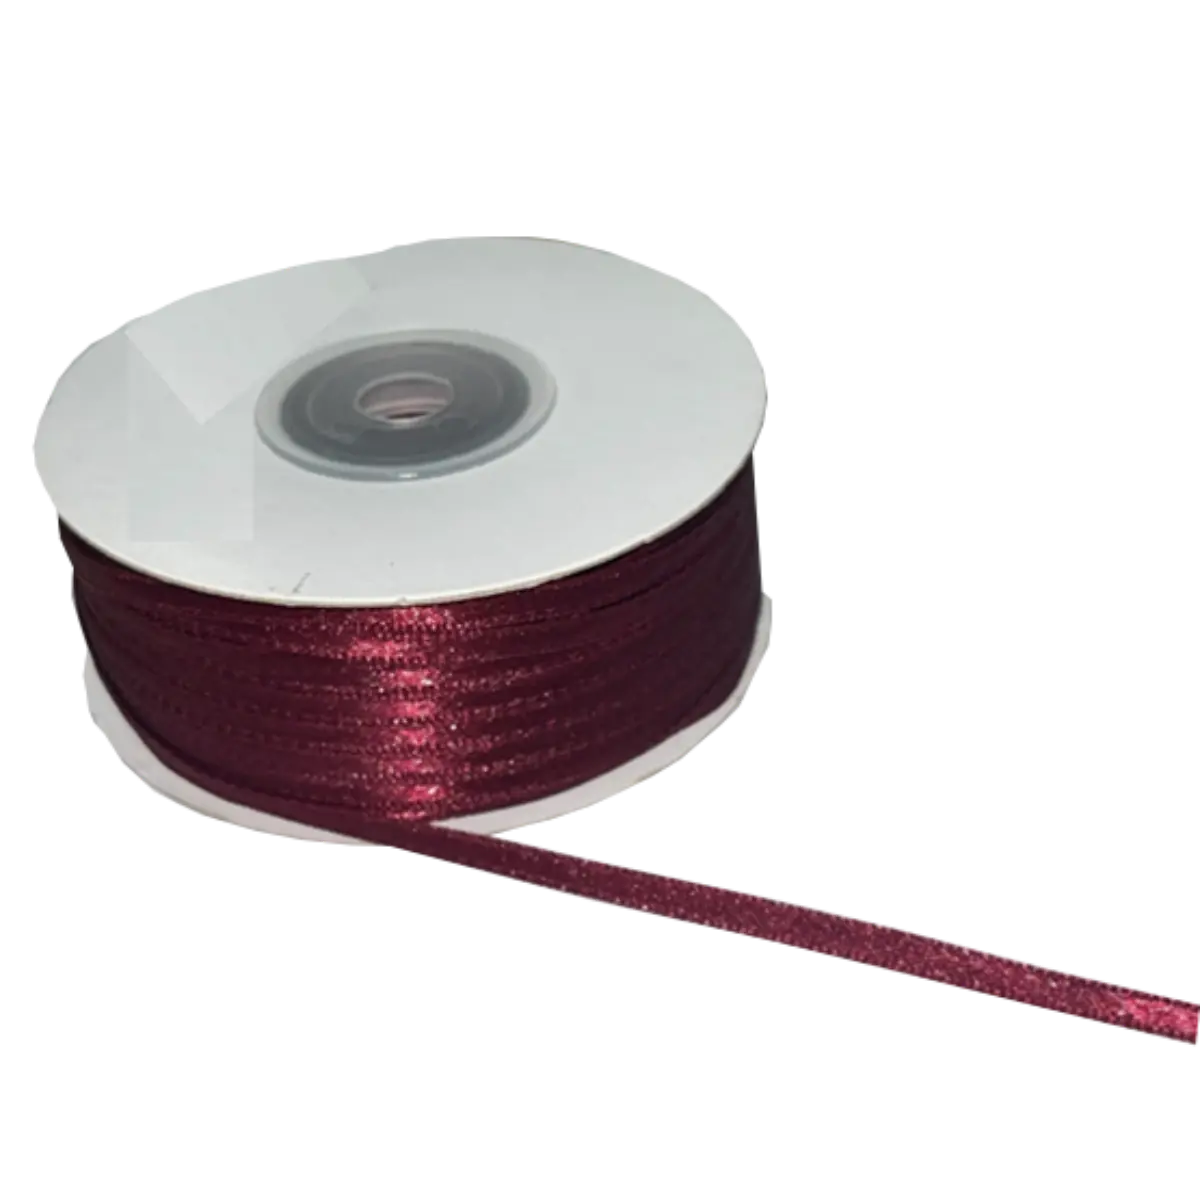 Burgundy Double Sided Satin Ribbons - 3mm Wide By 100mts